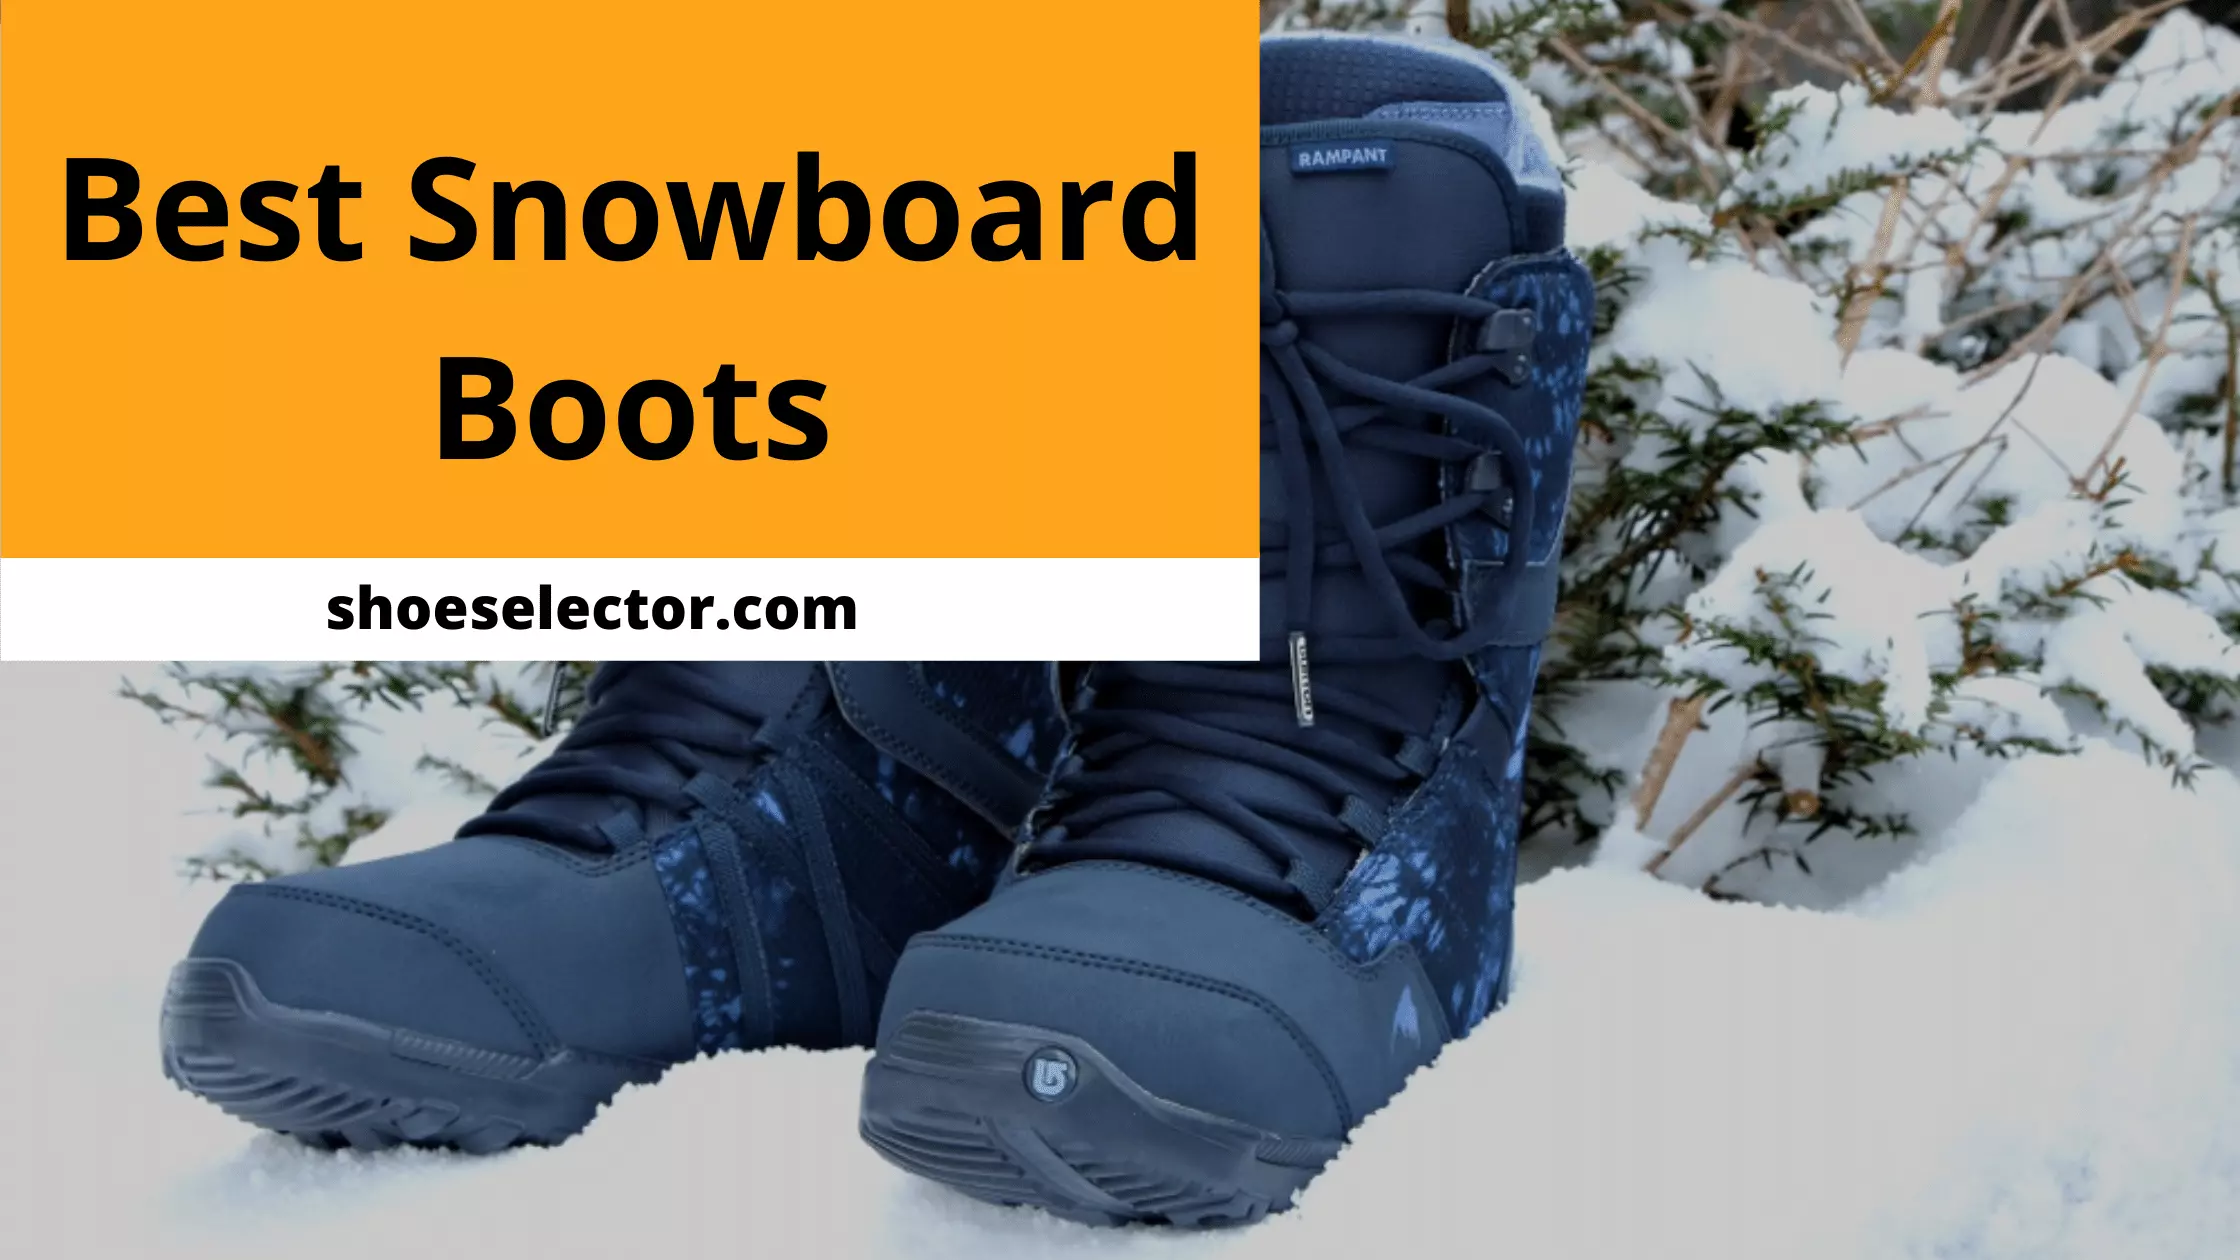 Best Snowboard Boots - Latest Guide